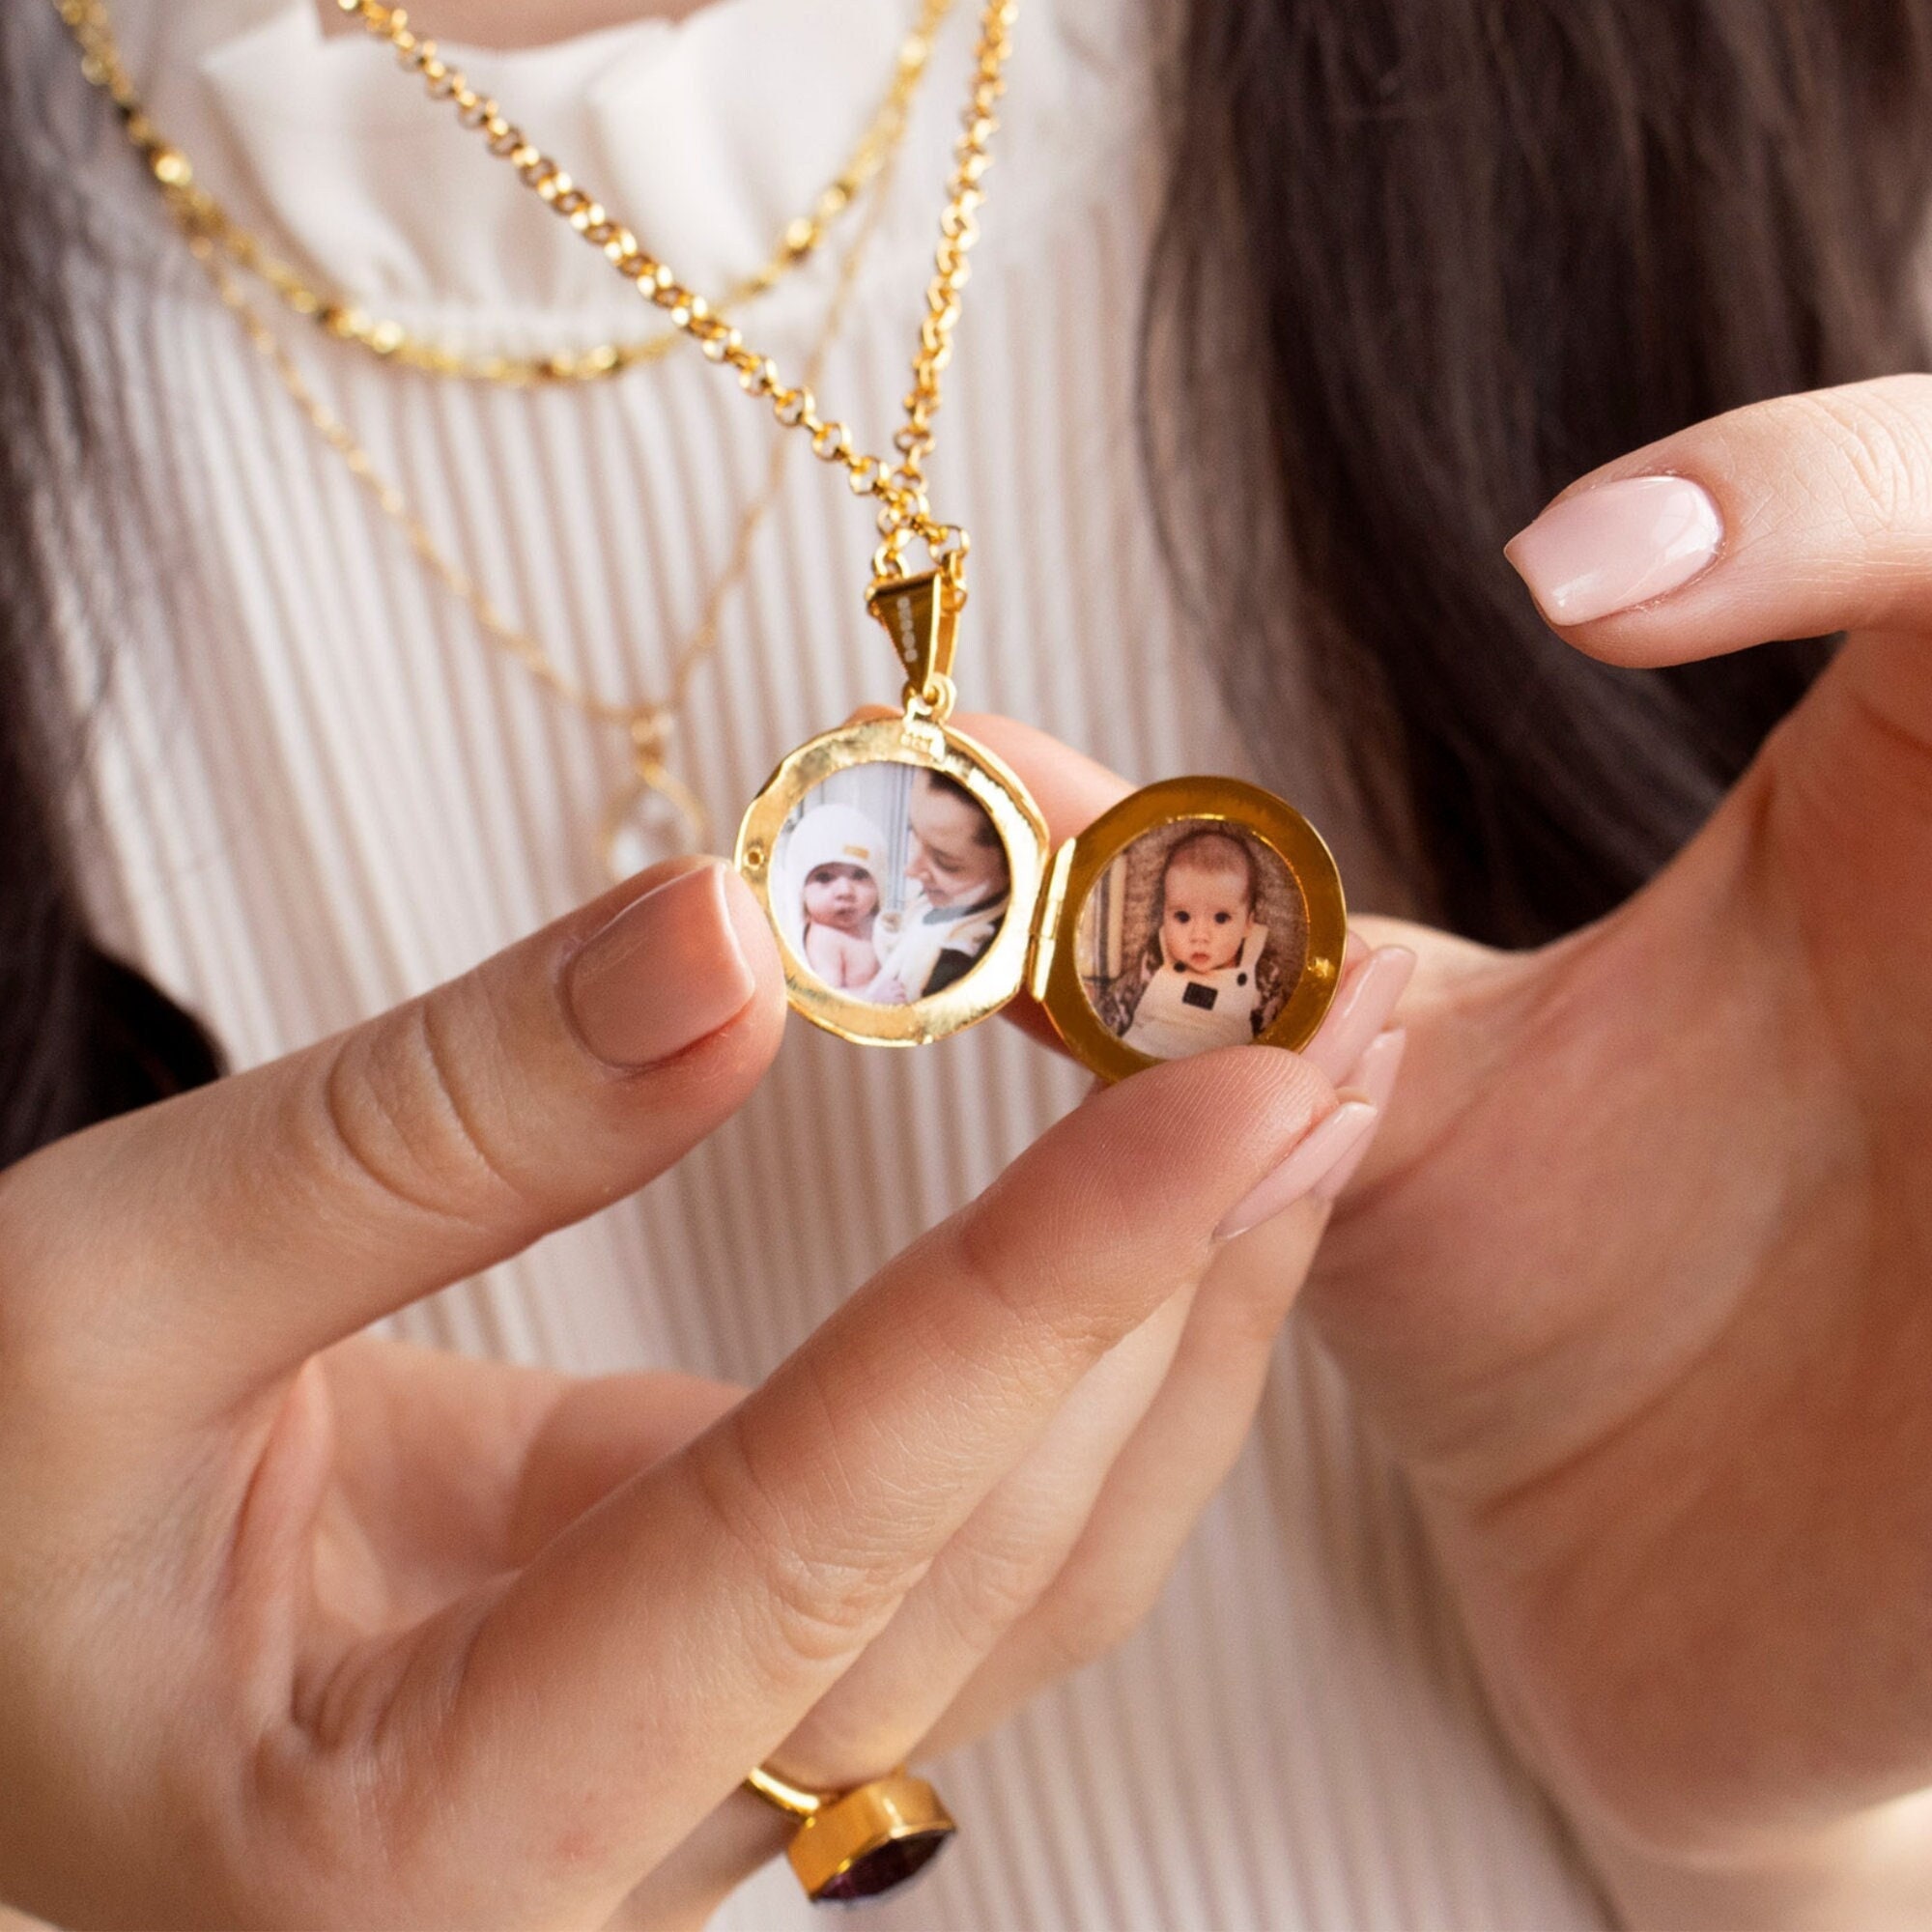 The Best Locket Necklaces That You Can Buy on Amazon